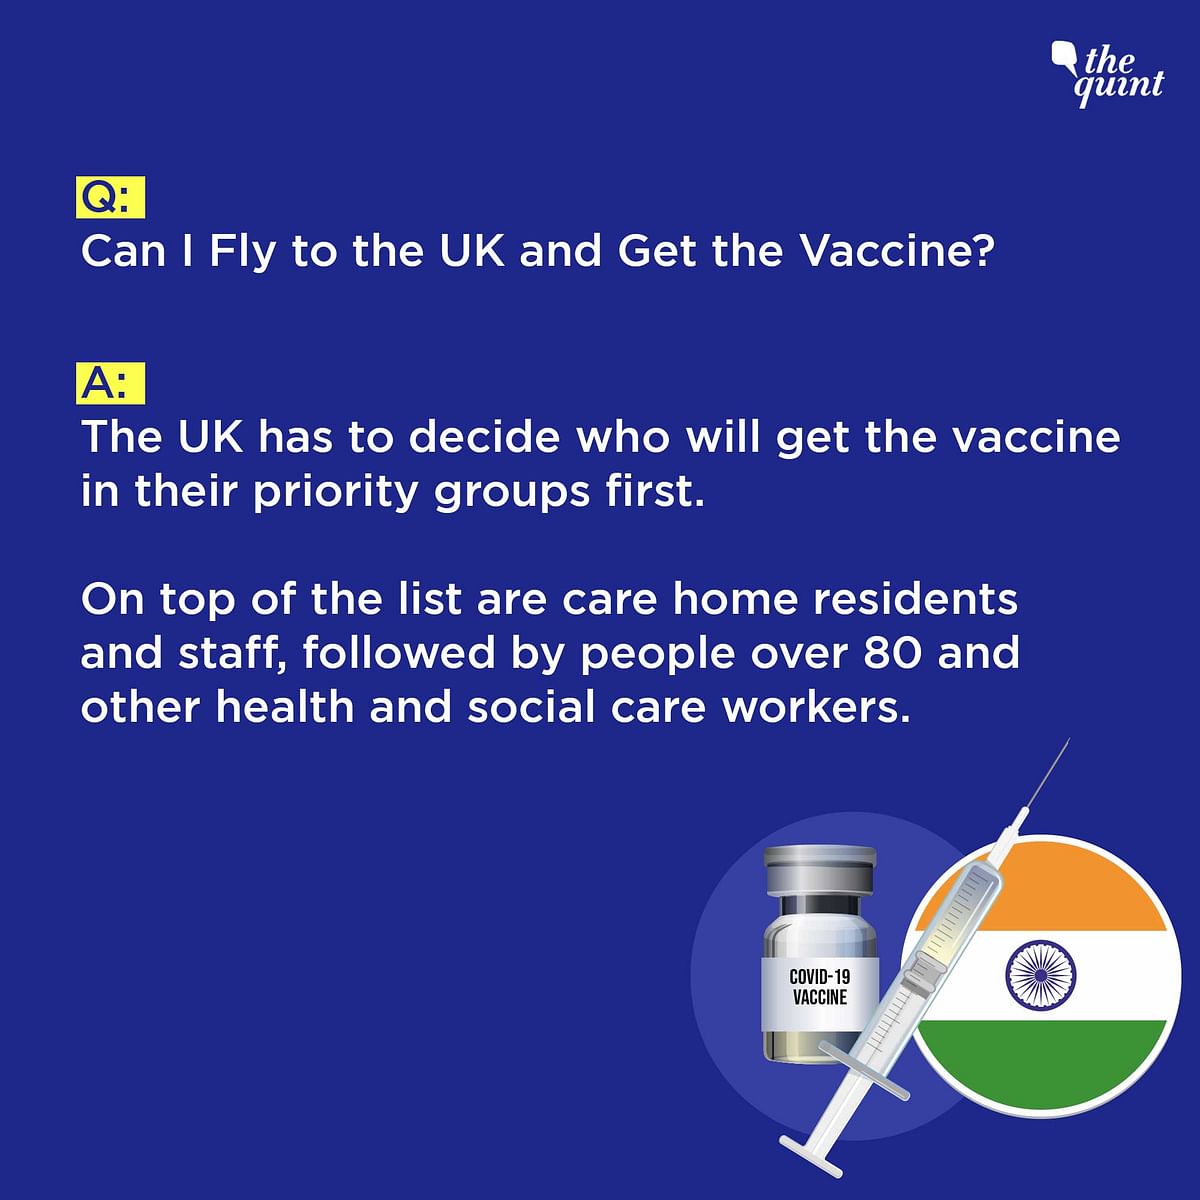 The United Kingdom has become the first country to approve the Pfizer-BioNTech vaccine for rollout from ‘next week’.